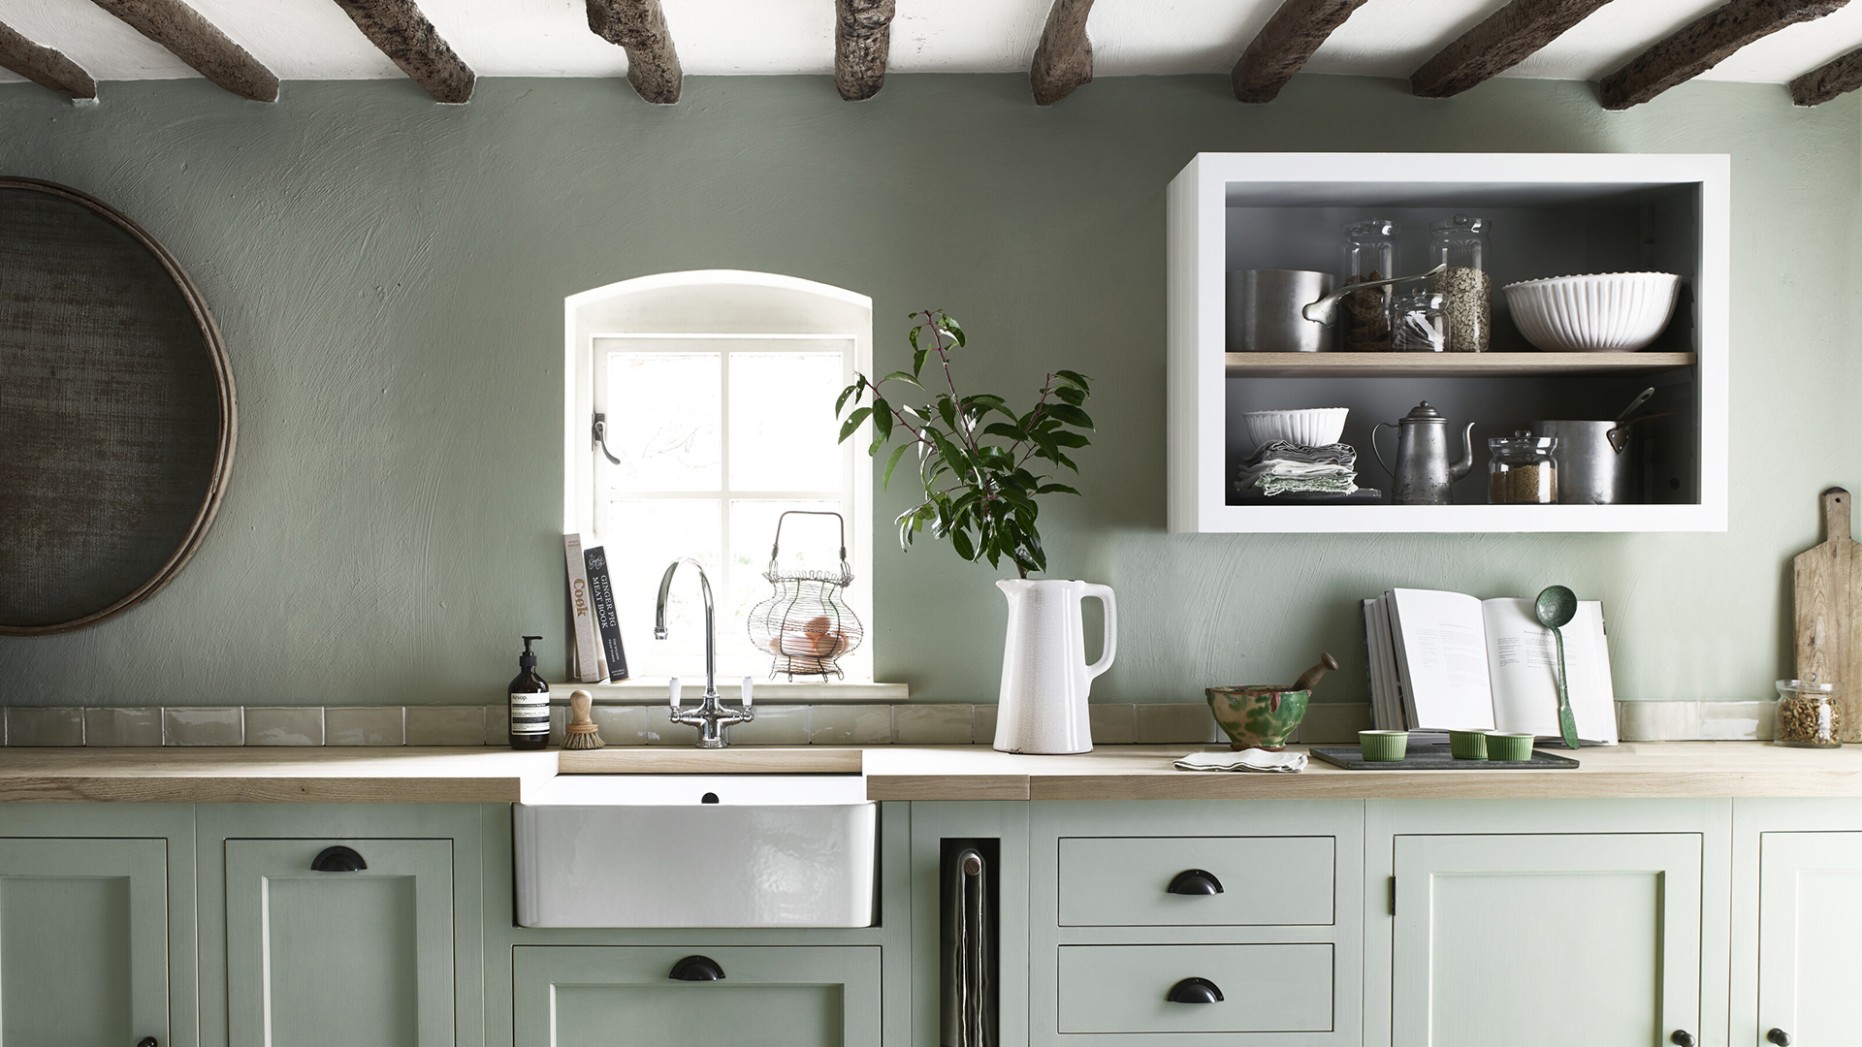 Cottage kitchen ideas - design inspiration  Country  - what is a cottage kitchen?